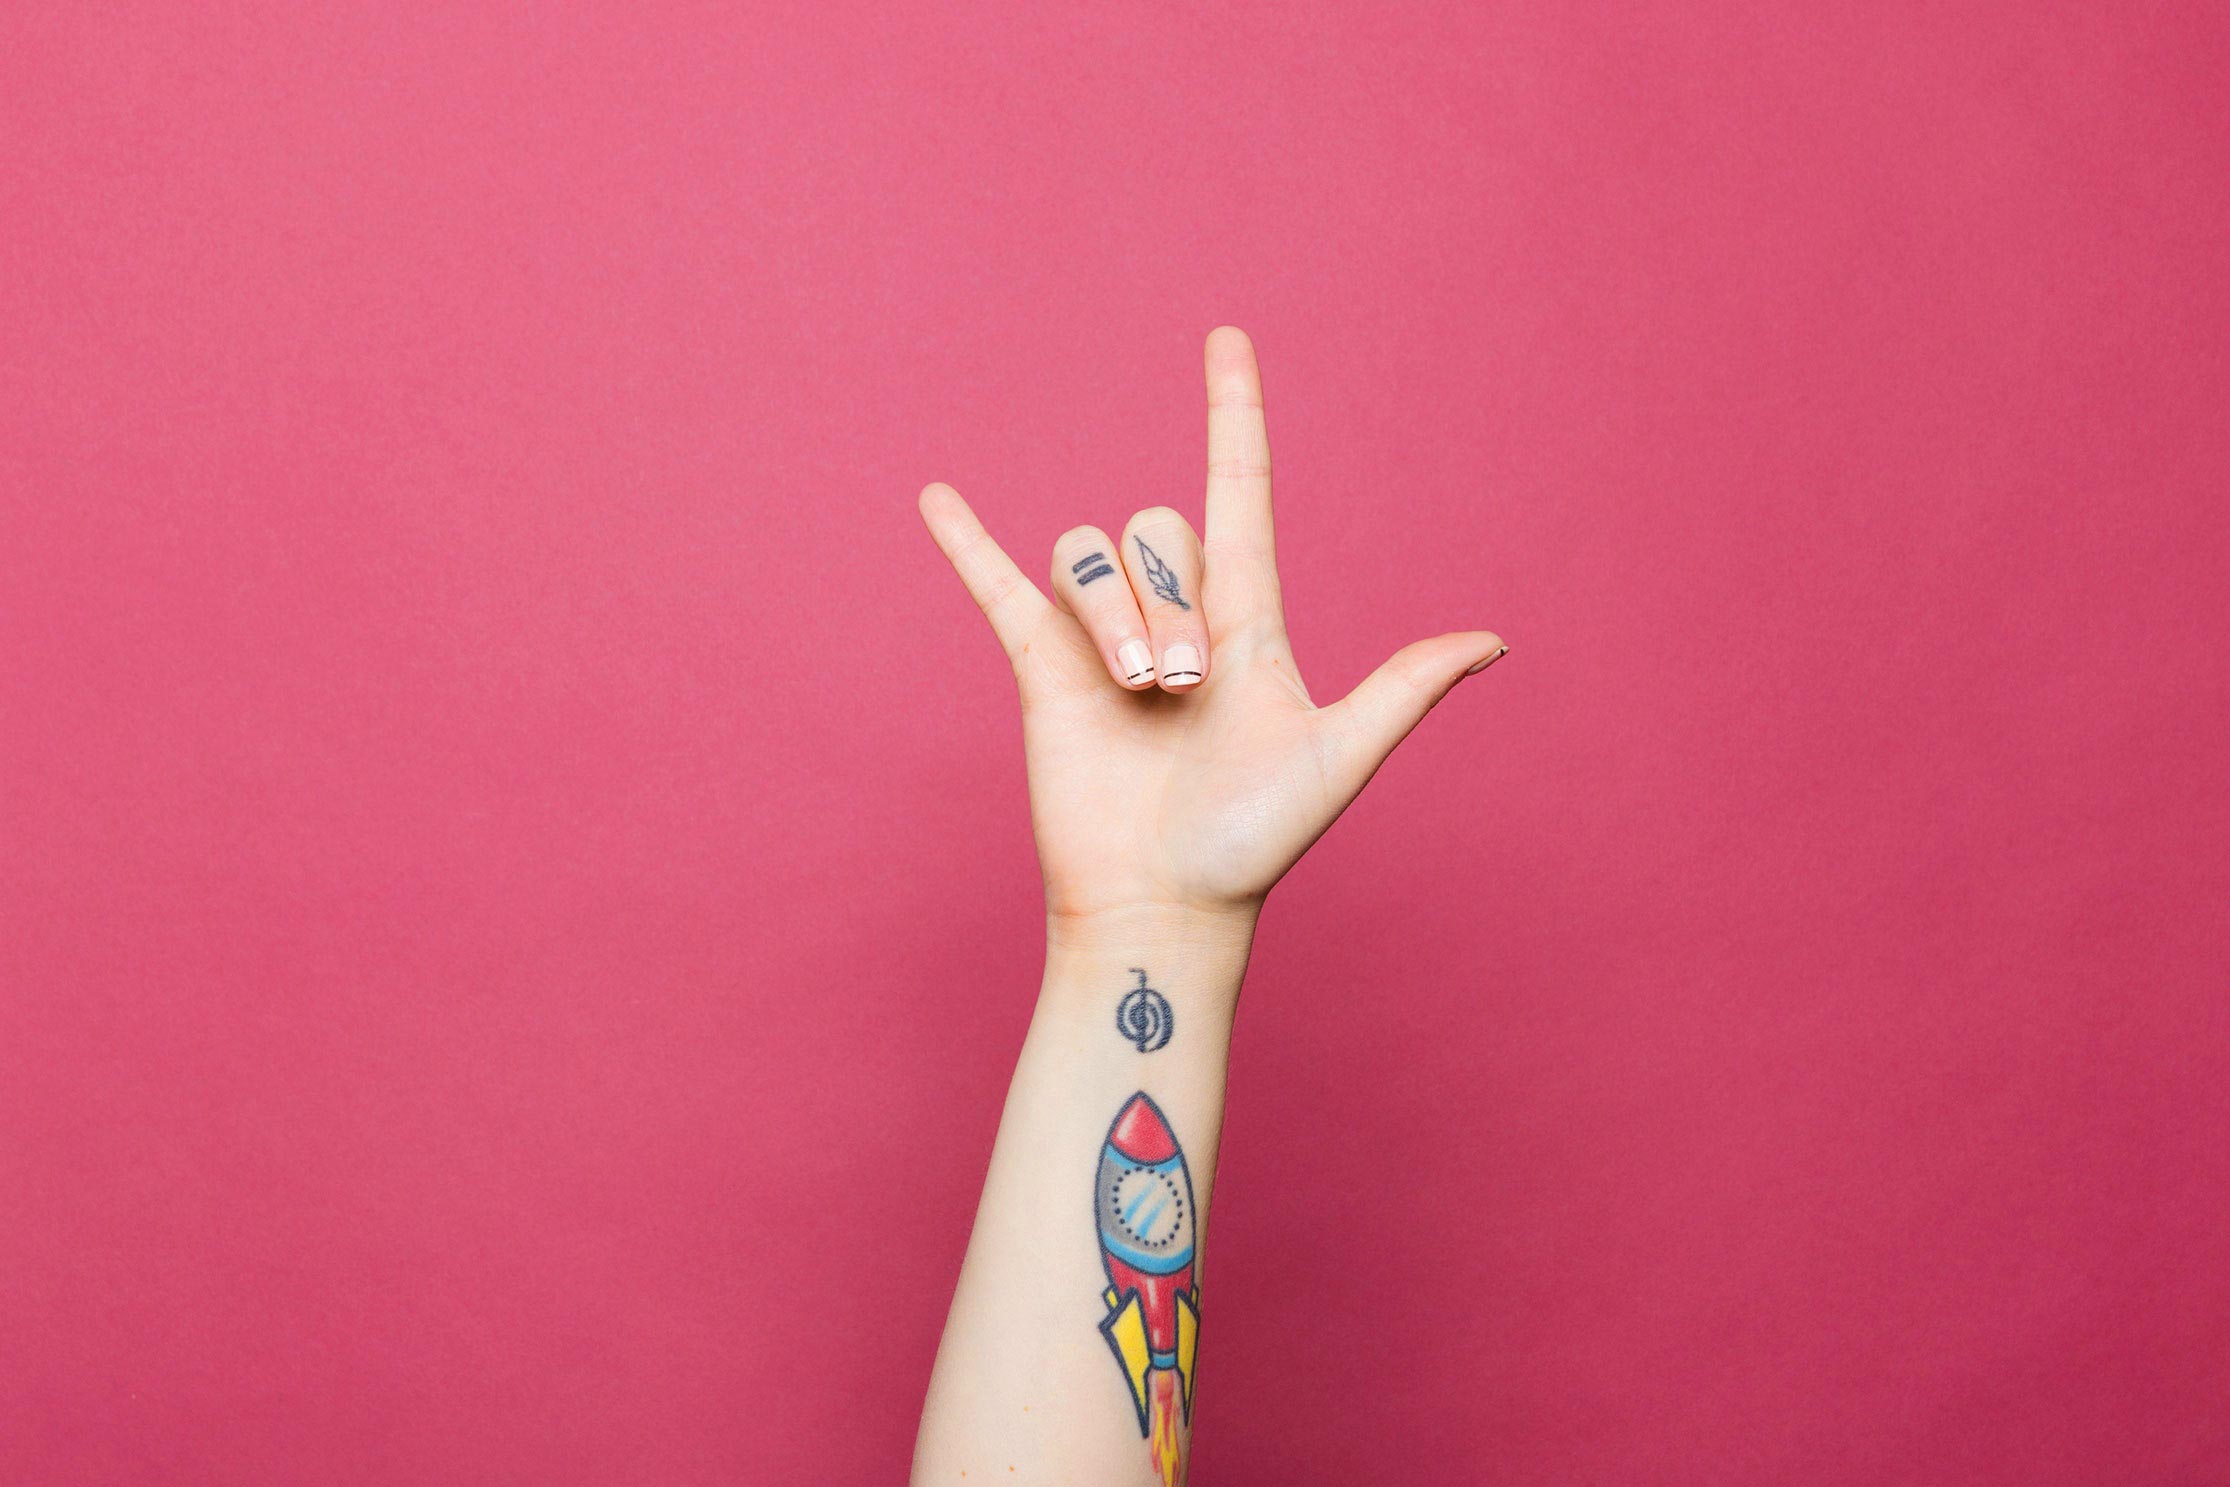 A photo of a tattooed hand, giving the "I love you" sign.